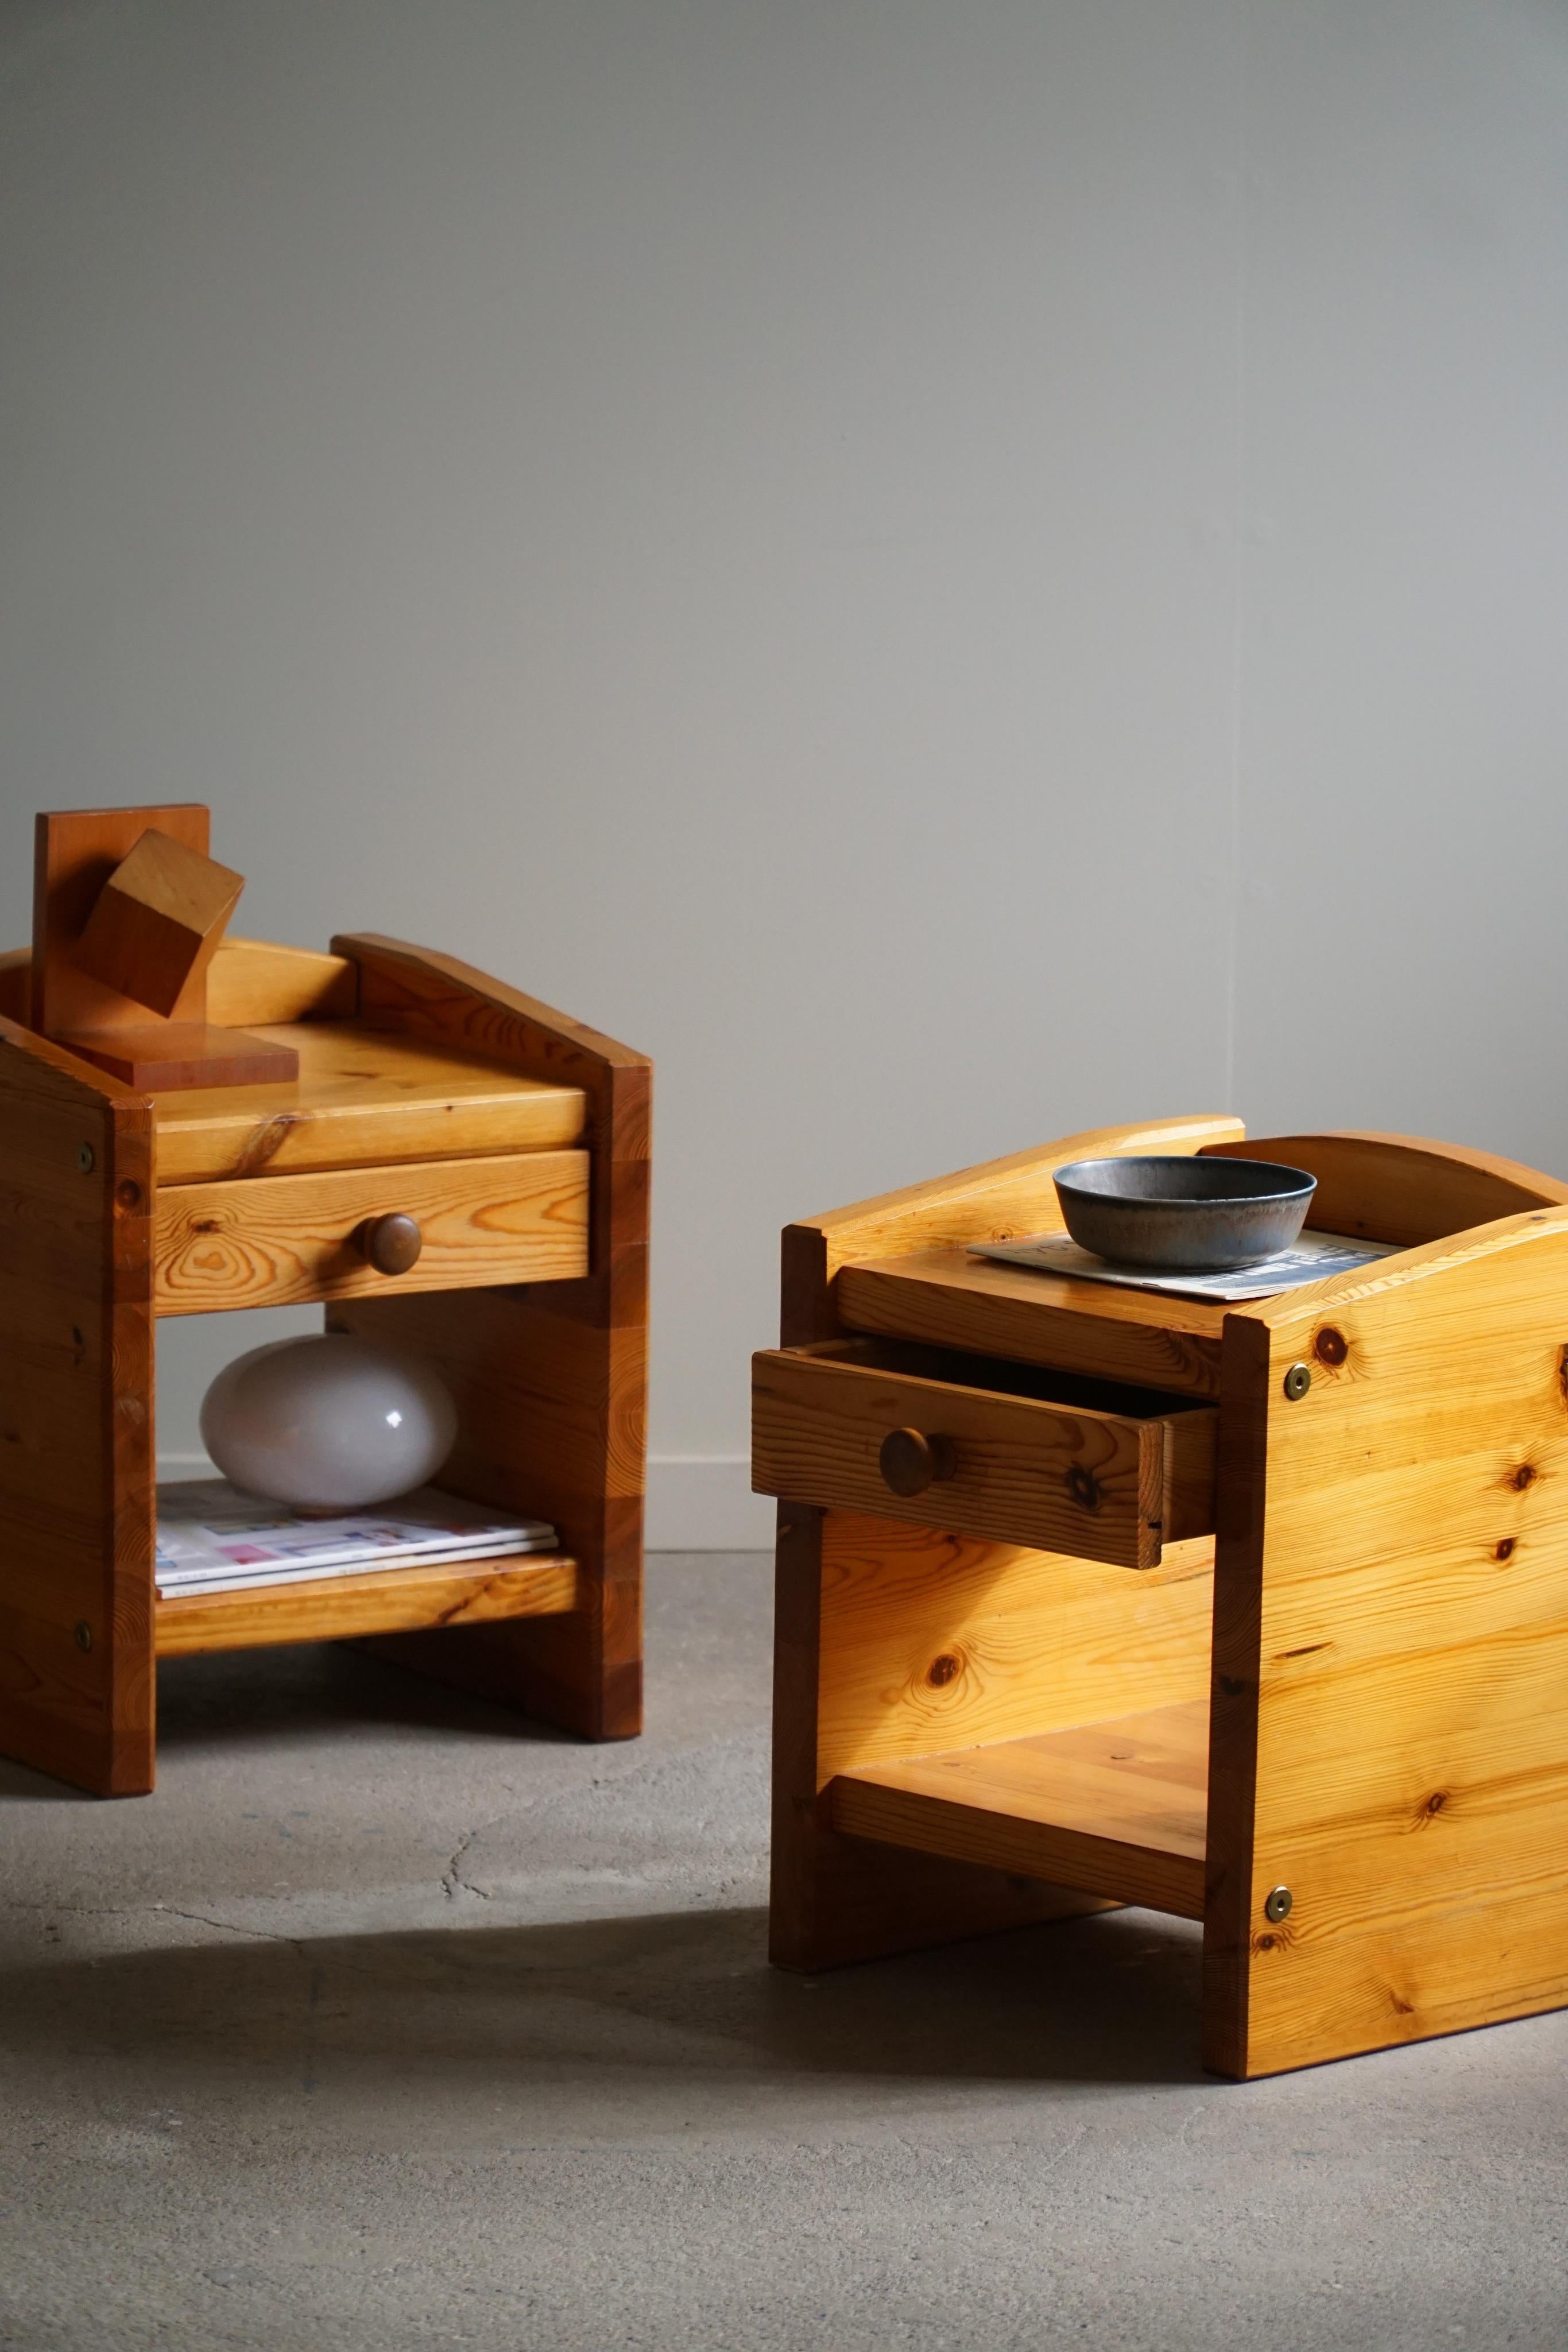 20th Midcentury, Pair of Brutalist Night Stands in Solid Pine, Denmark, 1970s For Sale 6